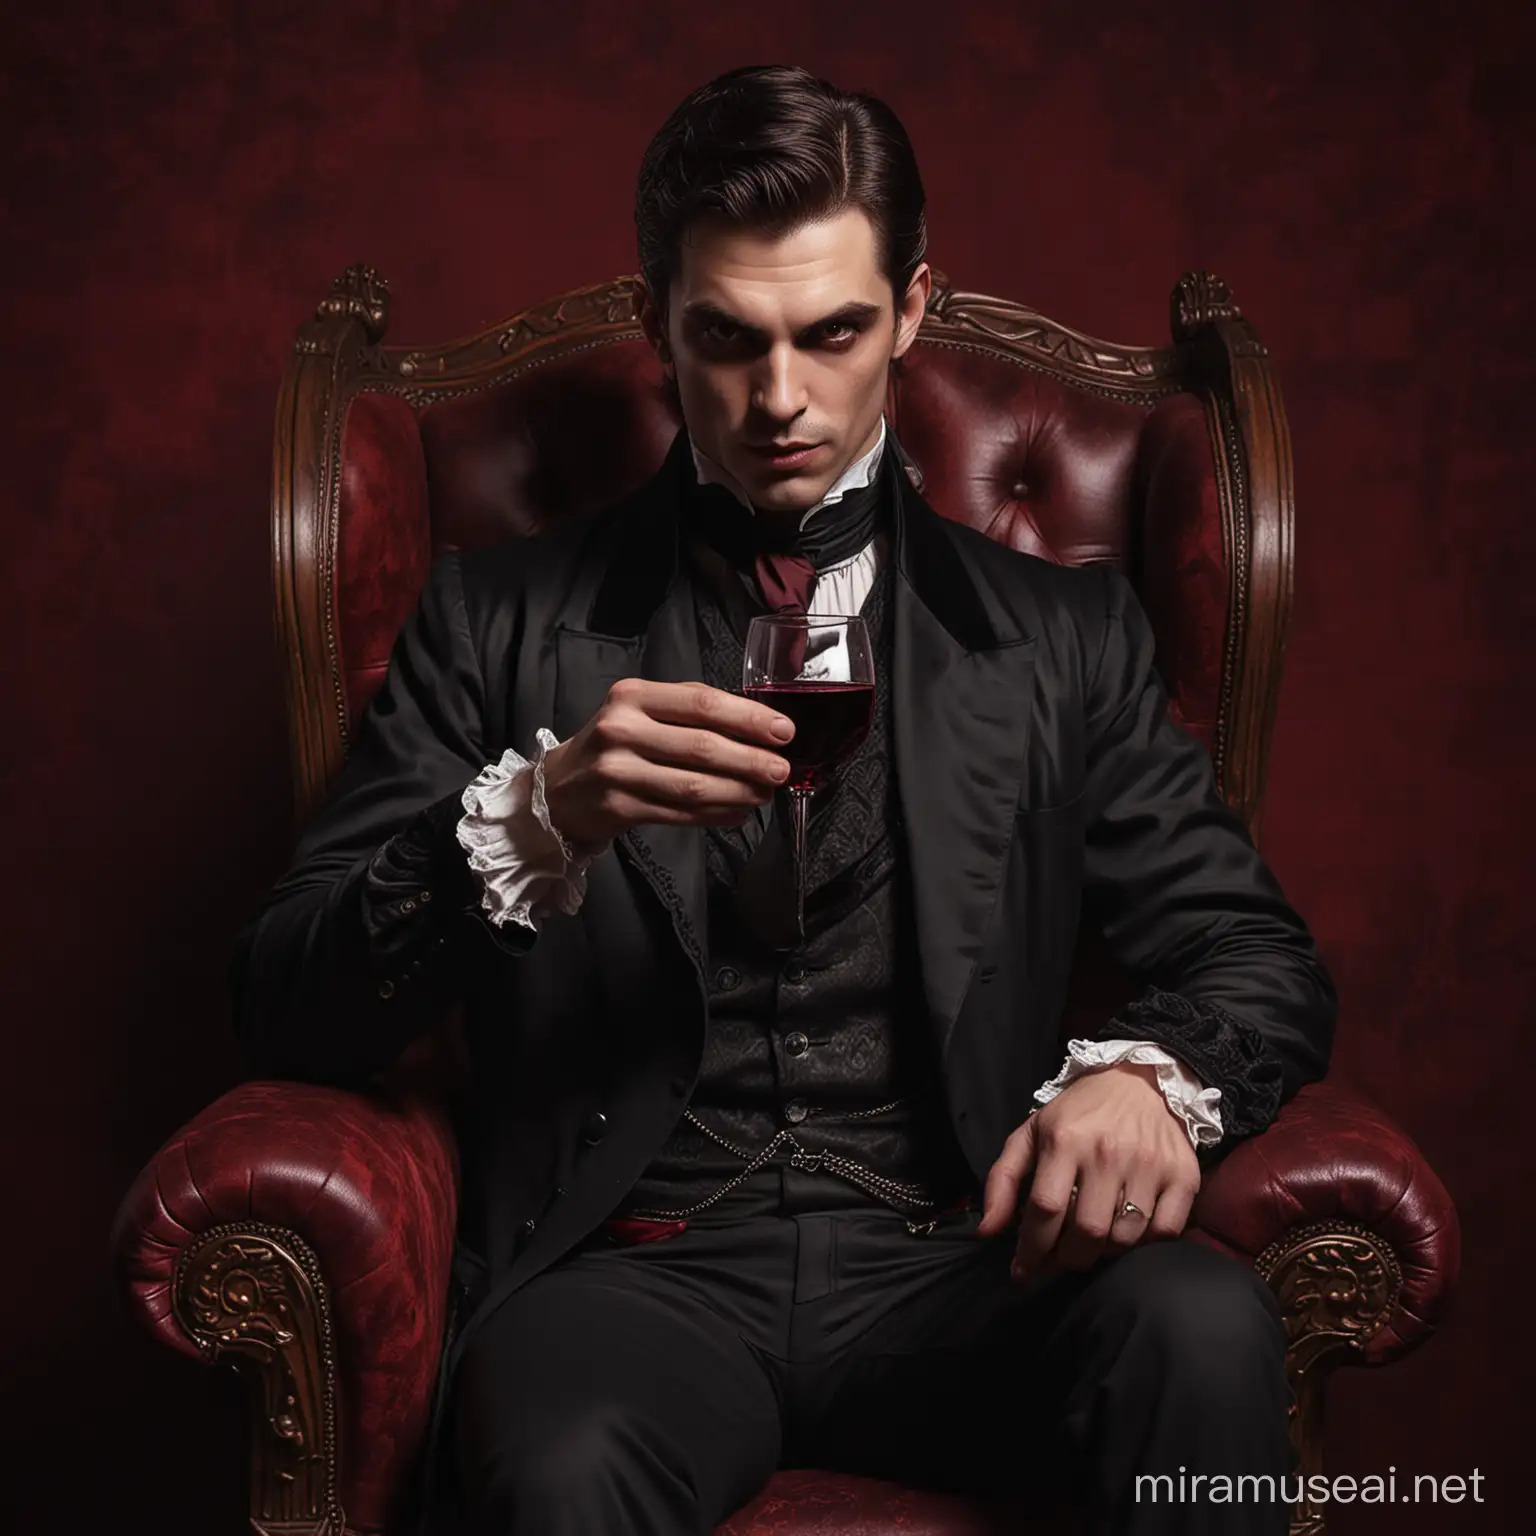 Male vampire with glowing eyes drinking a glass of wine sitting on a Victorian chair with dark red background , detailed